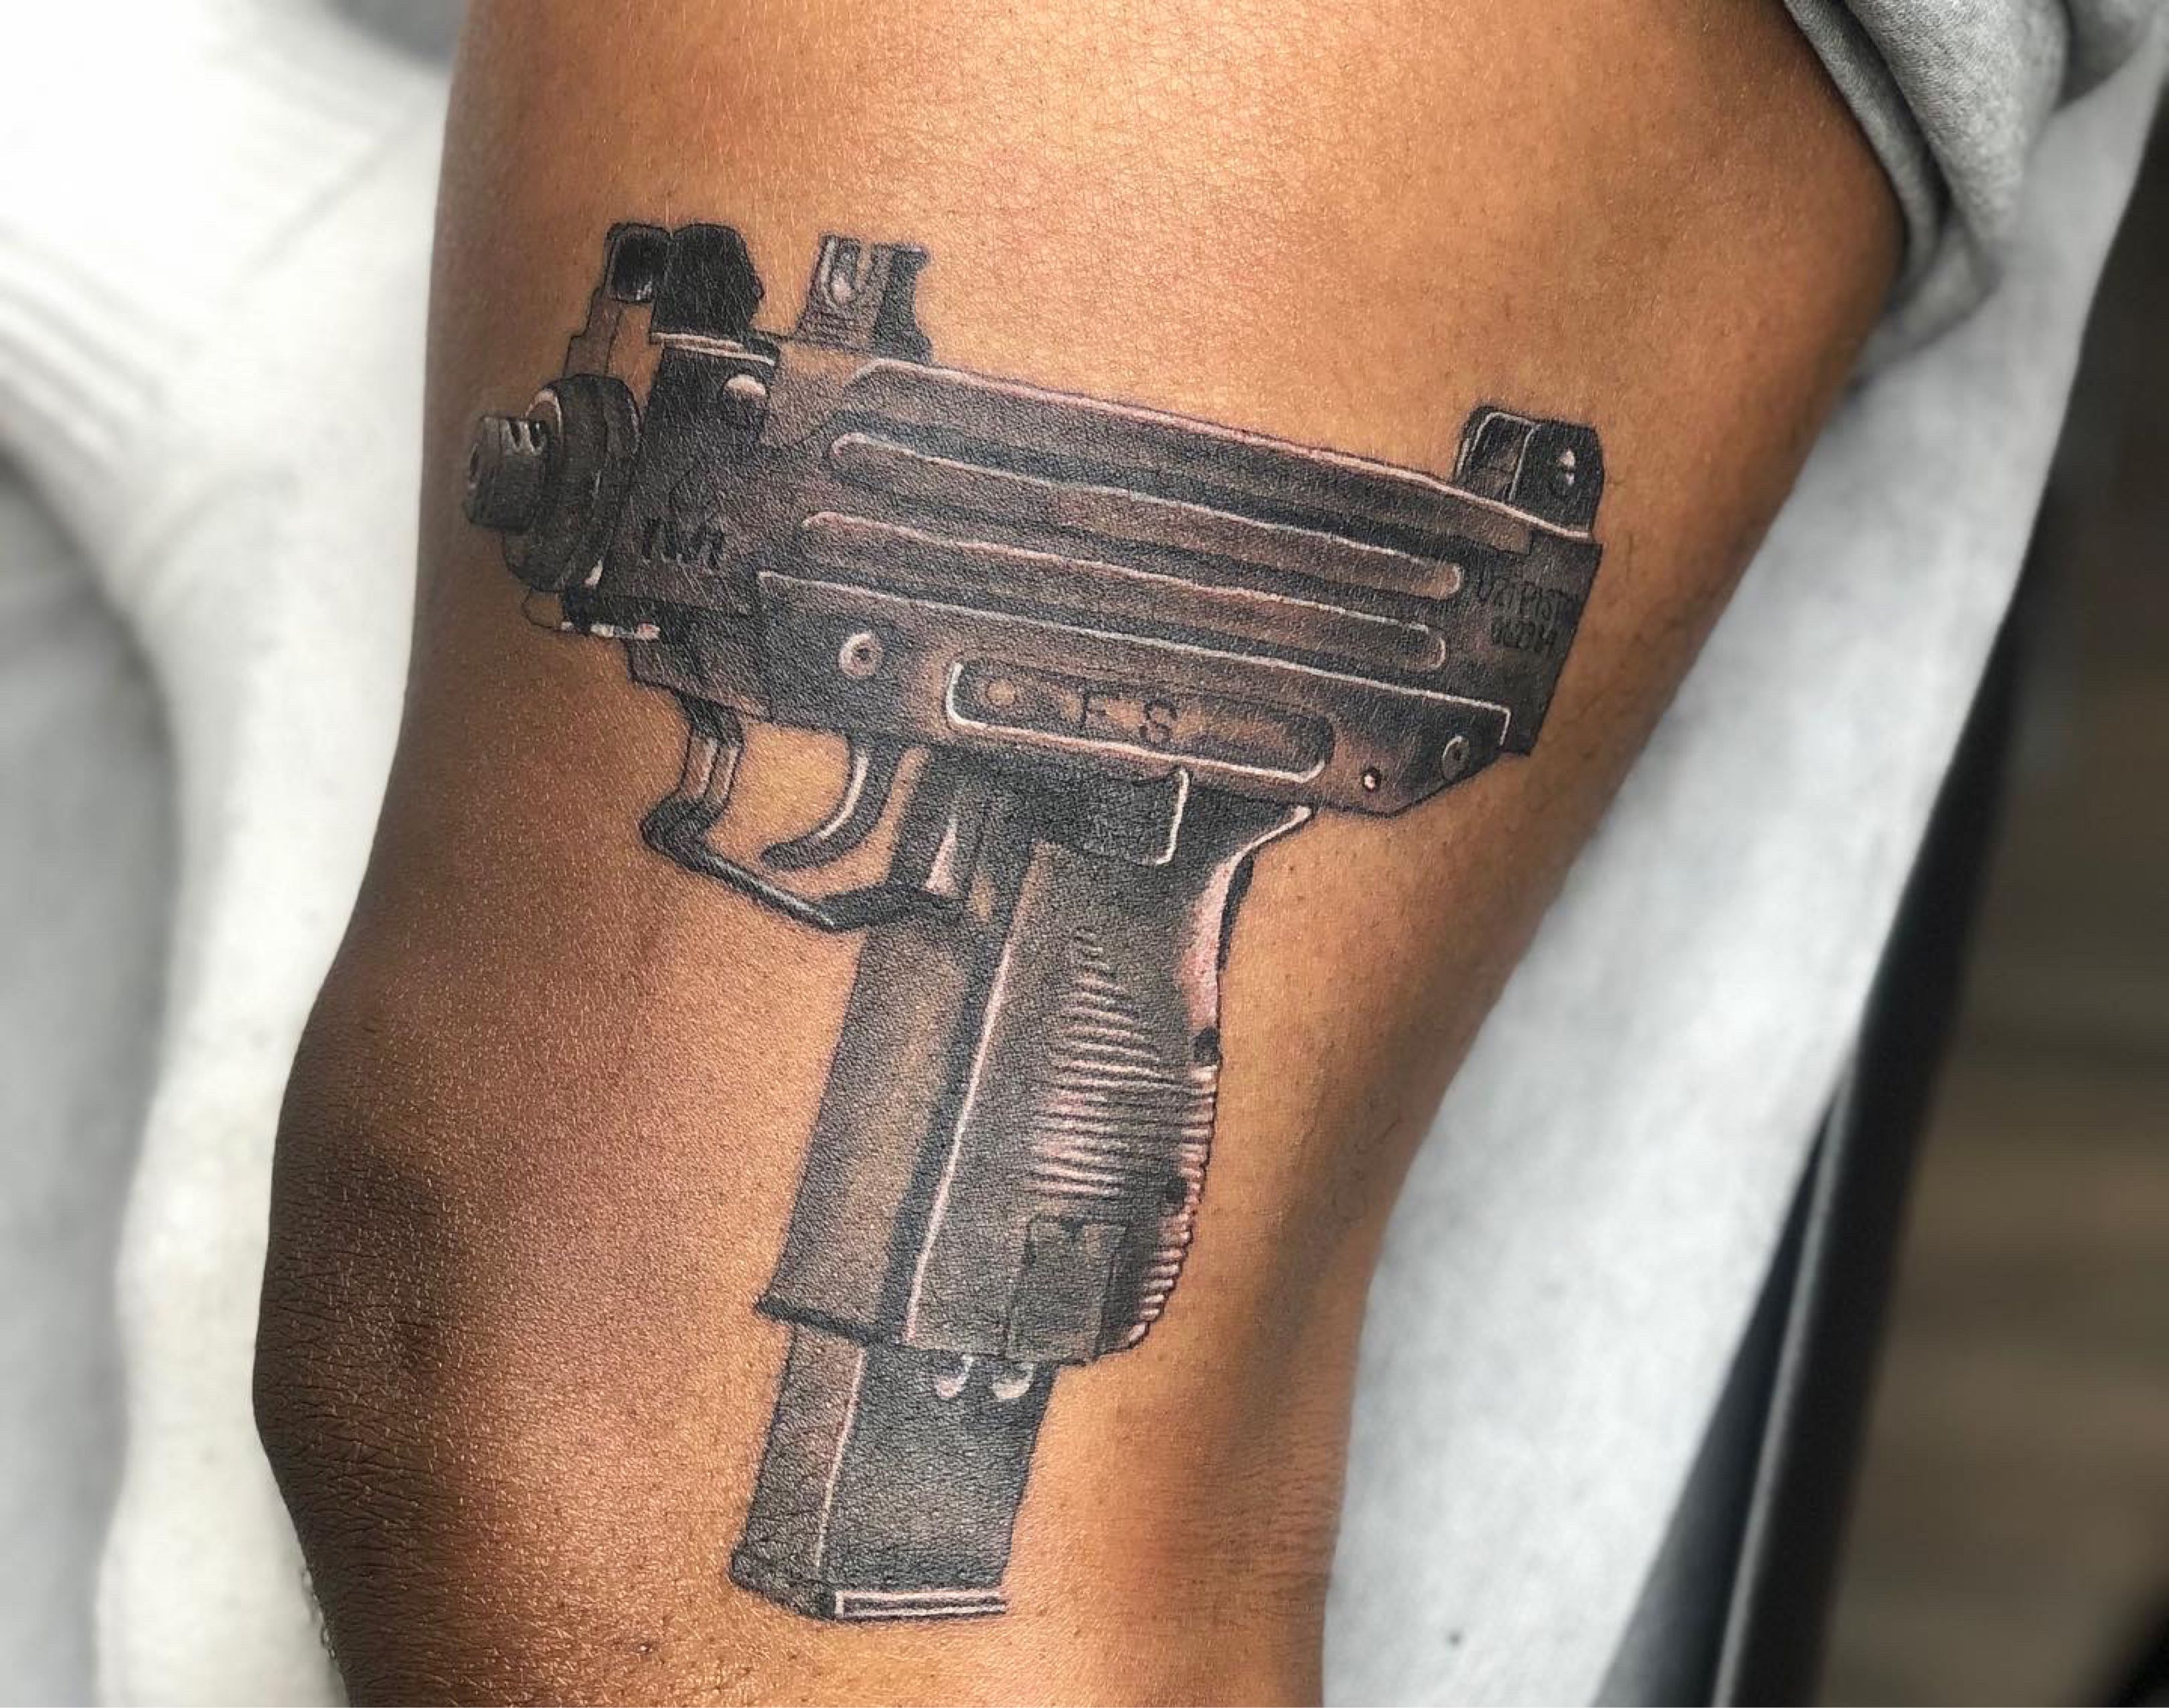 Rippd Canvas on Twitter Custome uzi pistol and joint from tonite super  fun piece Come get a 1 of a kind tattoo rippdcanvas baltimoretattoo  baltimoretattooshop httpstcoTwUF8sqp7C  Twitter